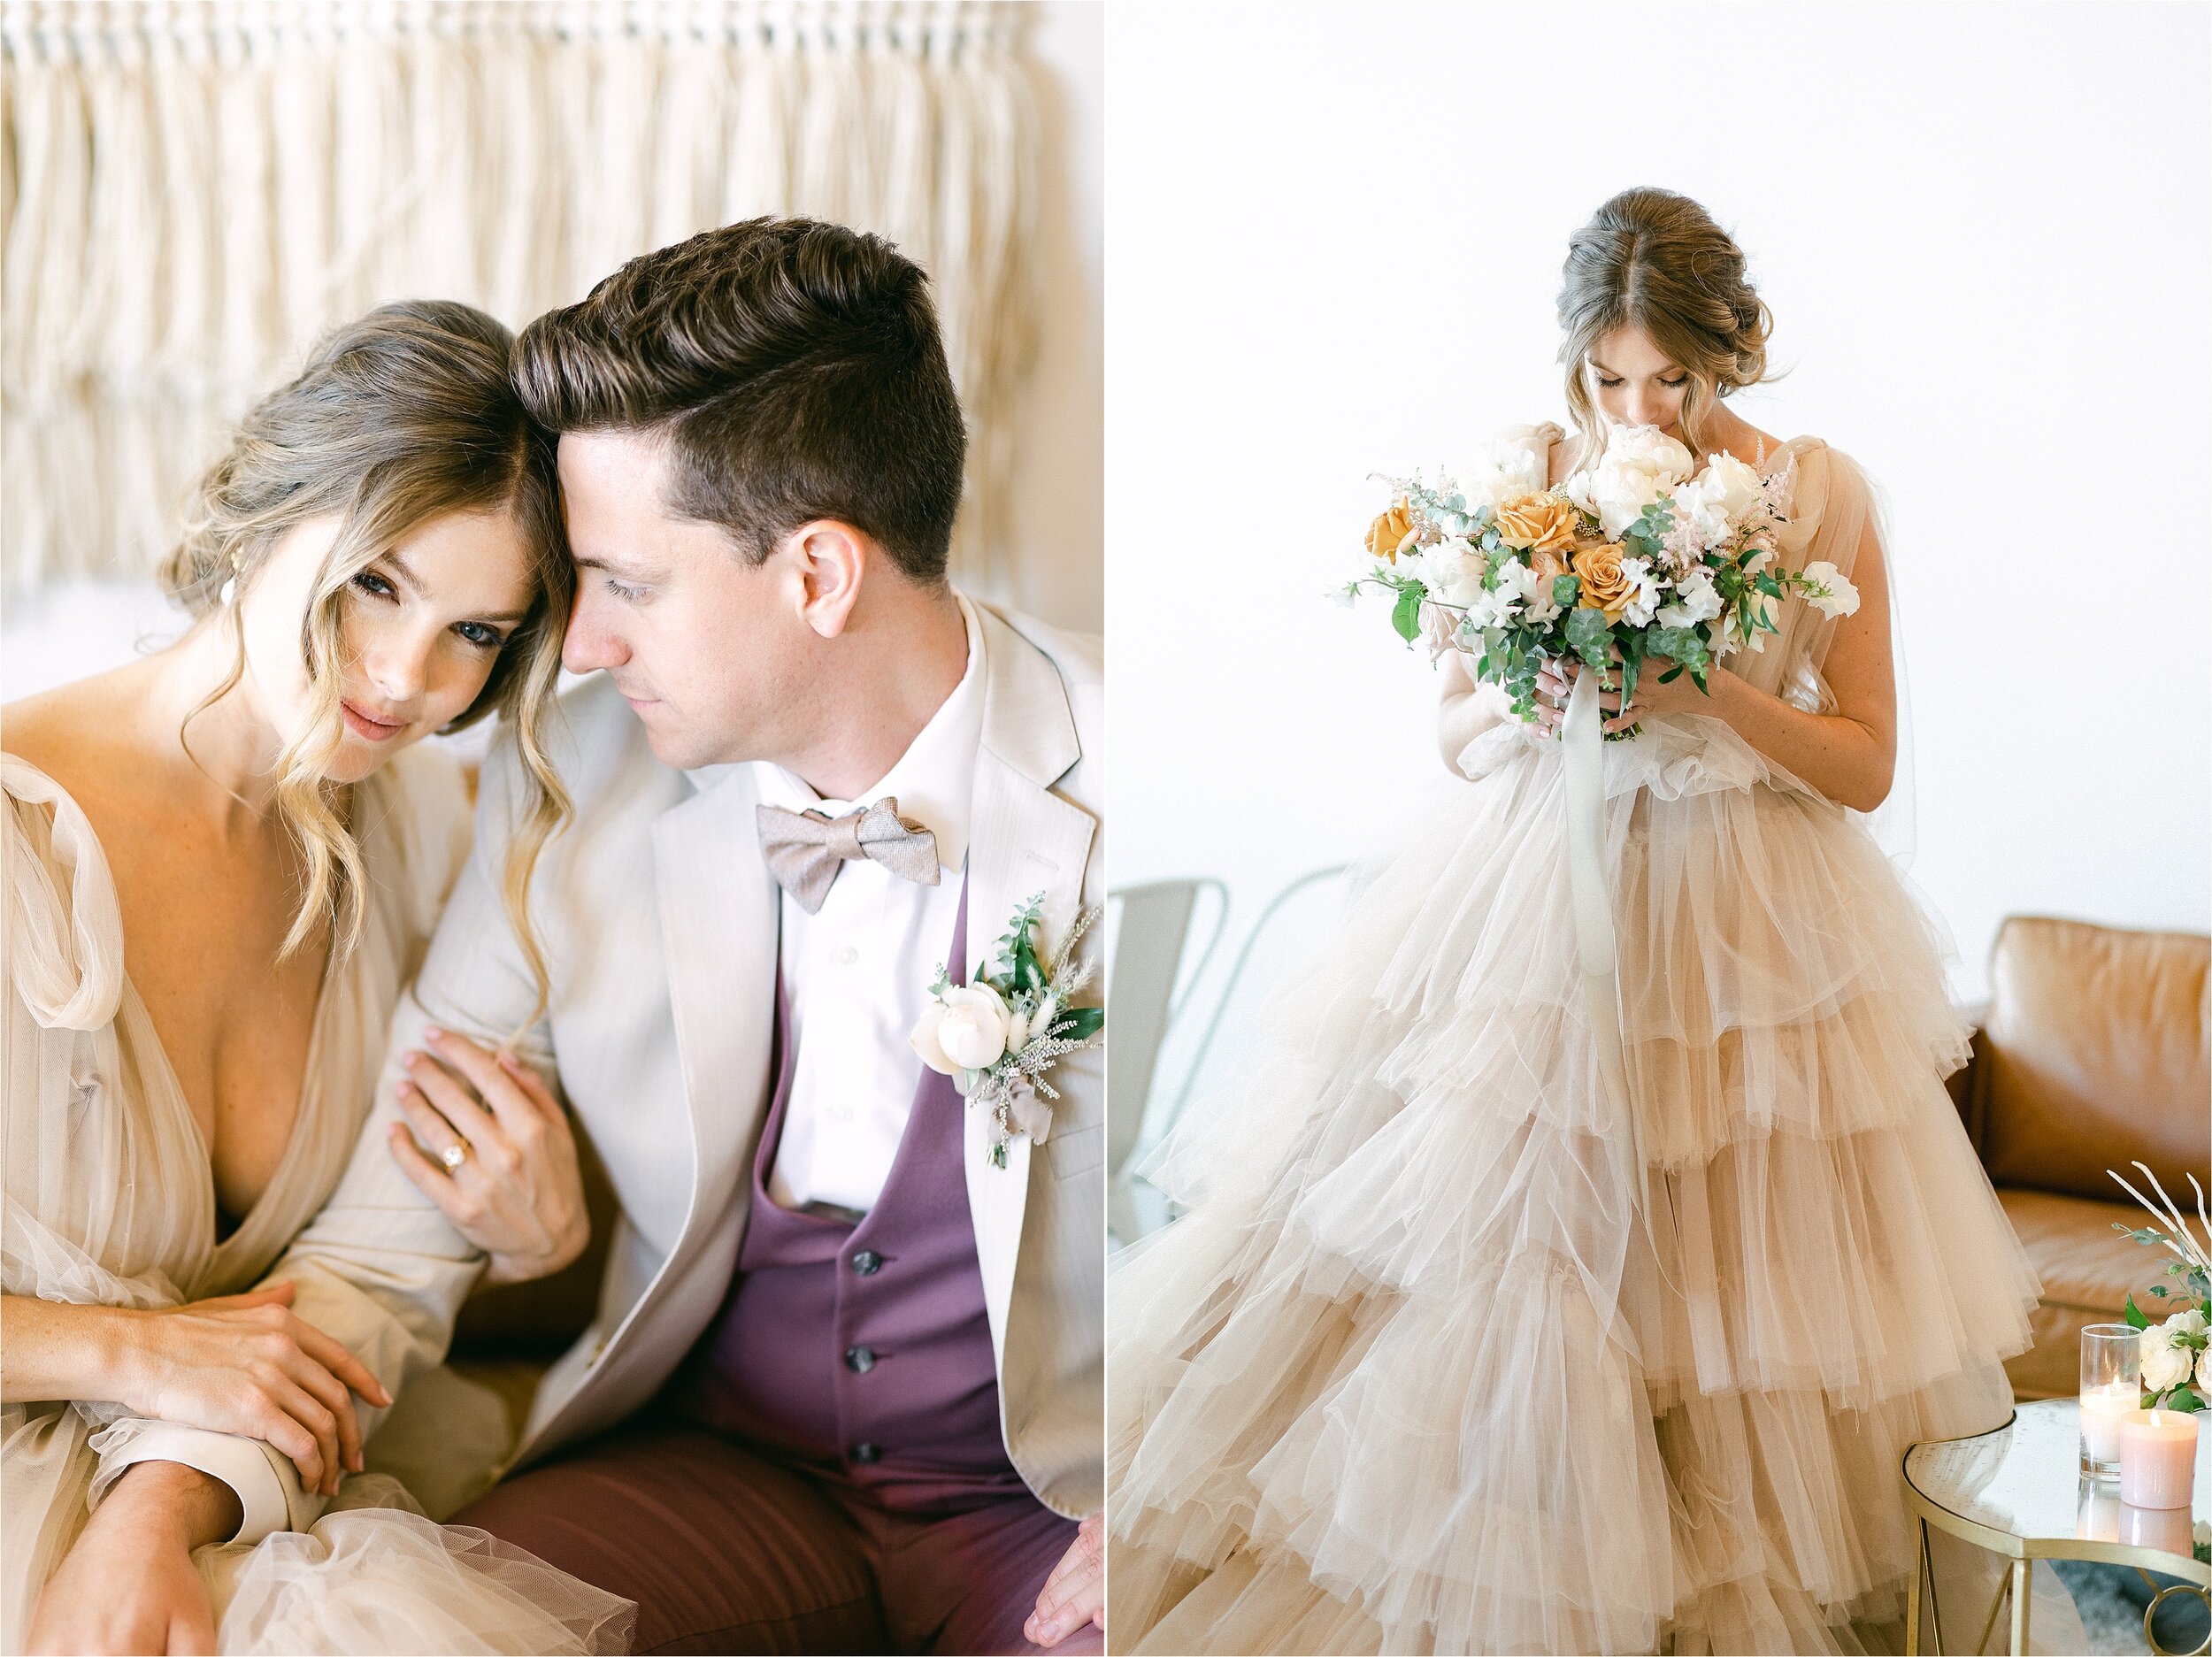 Bride and groom snuggle into each other and share a sweet moment at their neutral toned micro wedding